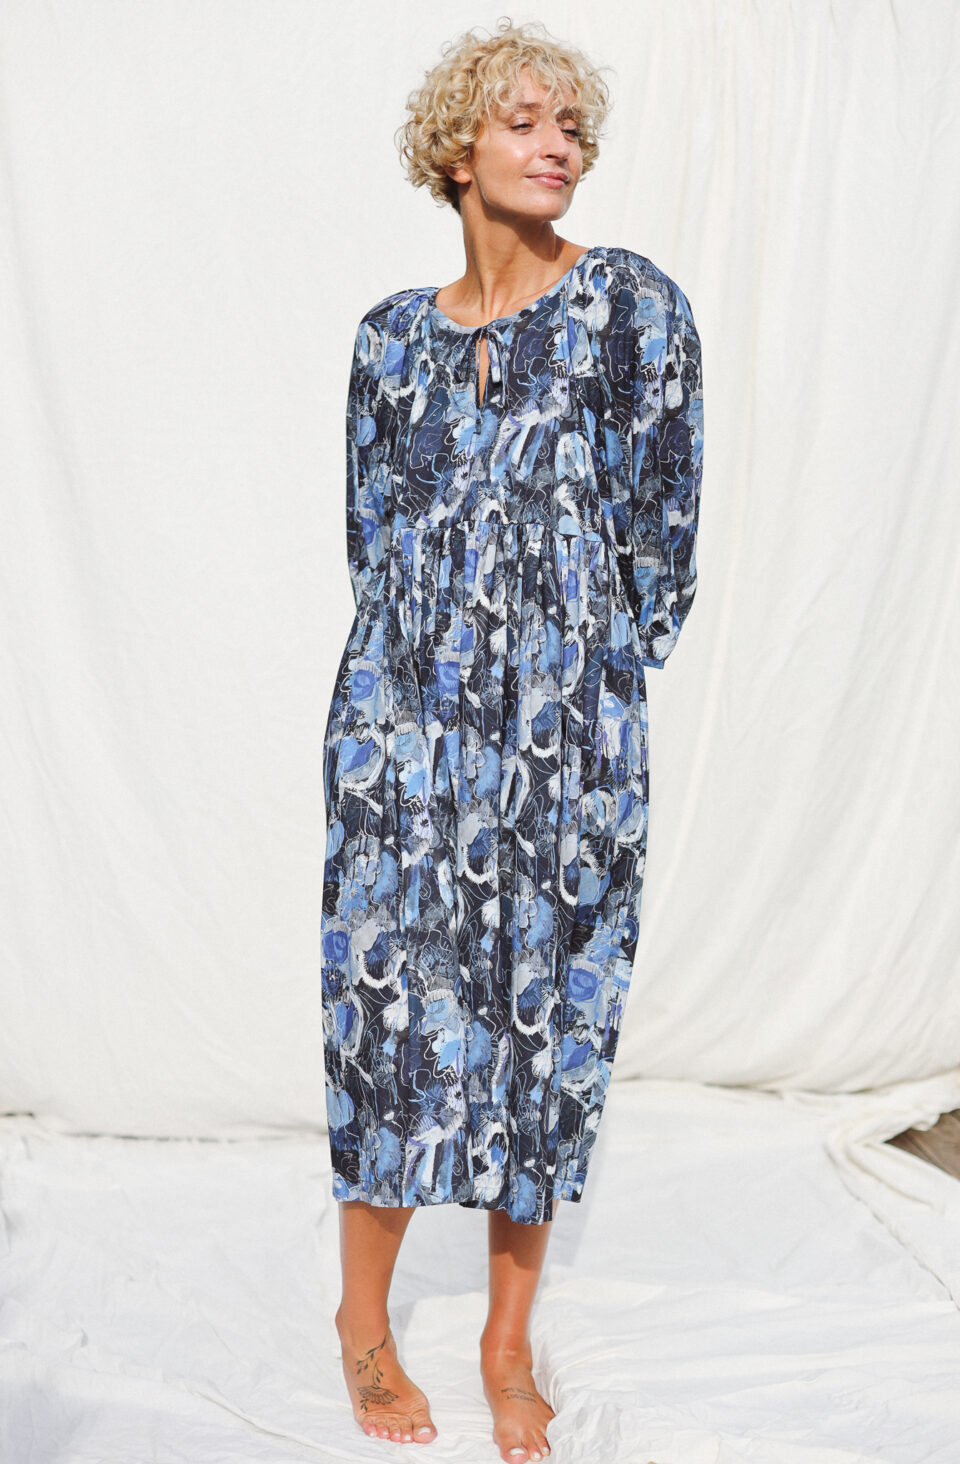 Reversible abstract print dress SOOZY LIPSEY | Dress | Sustainable clothing | OffOn clothing